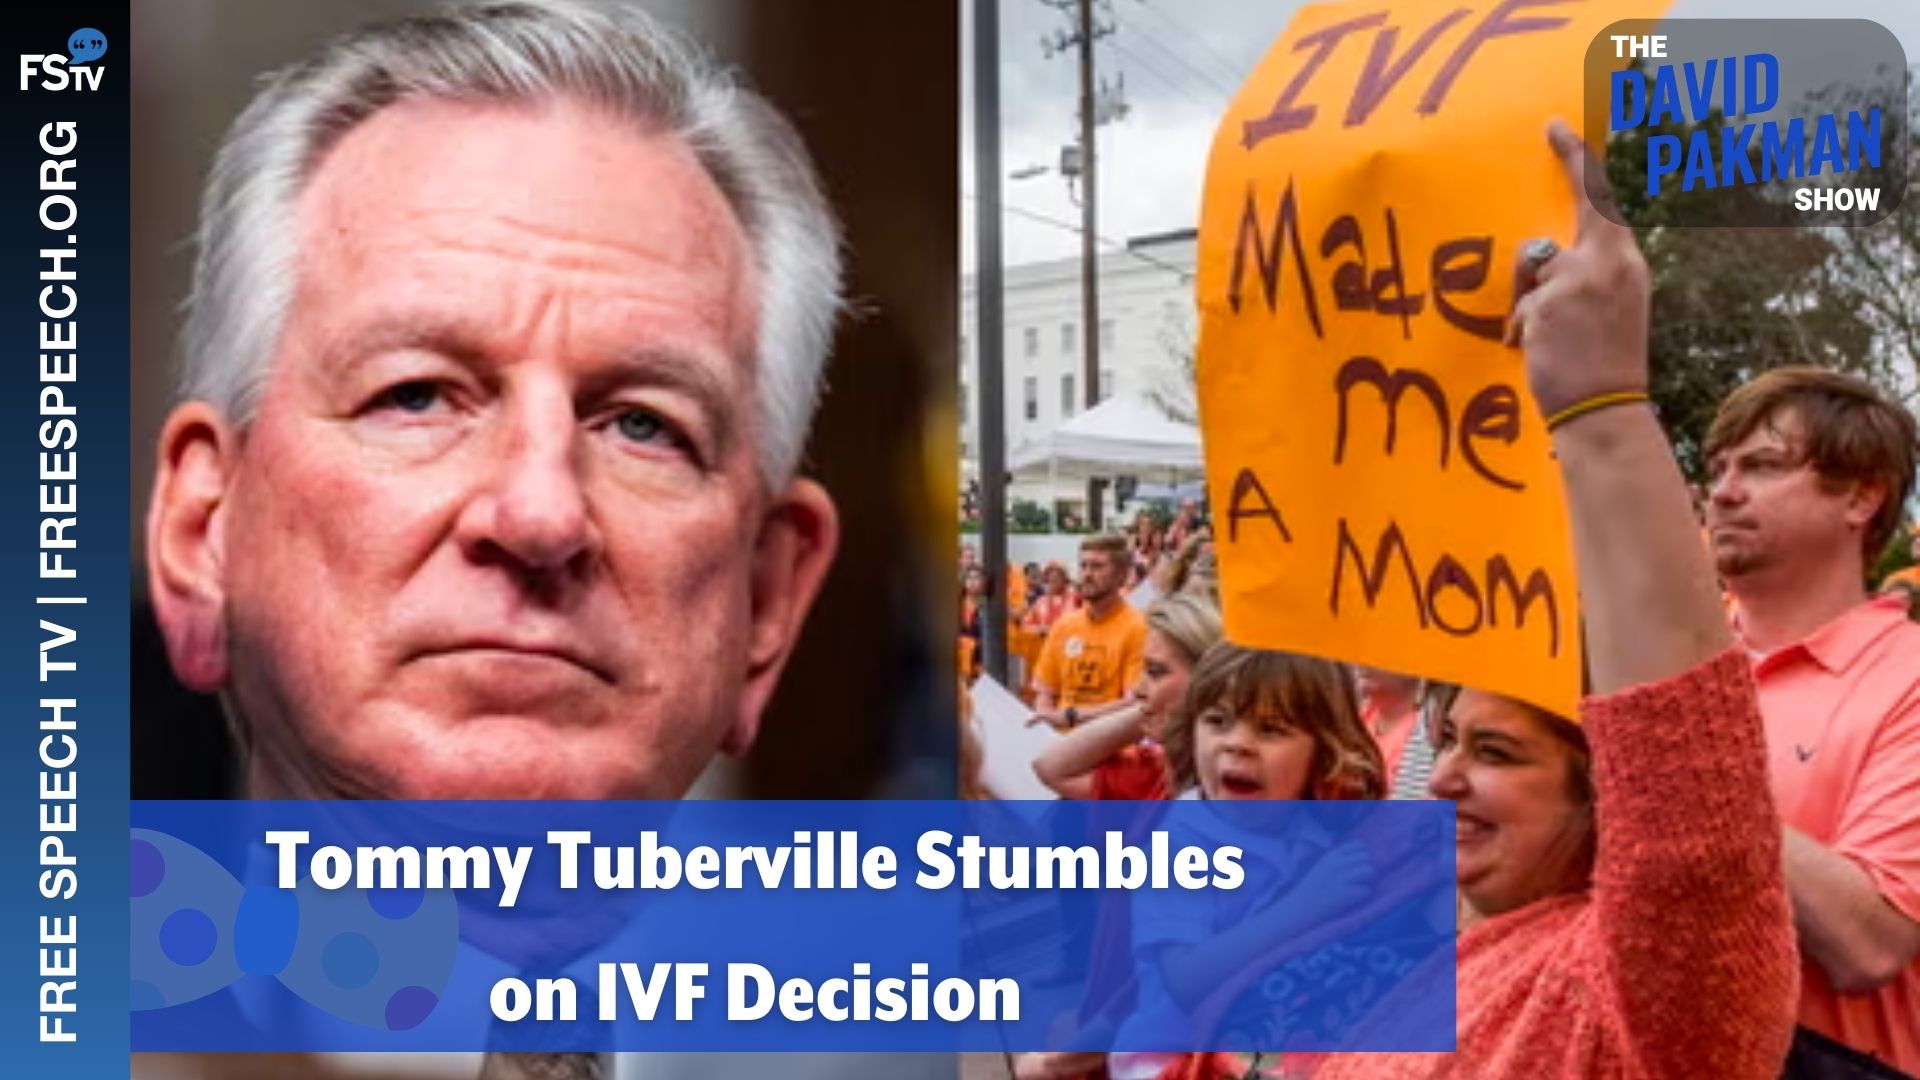 The David Pakman Show | Tommy Tuberville Stumbles on IVF Decision